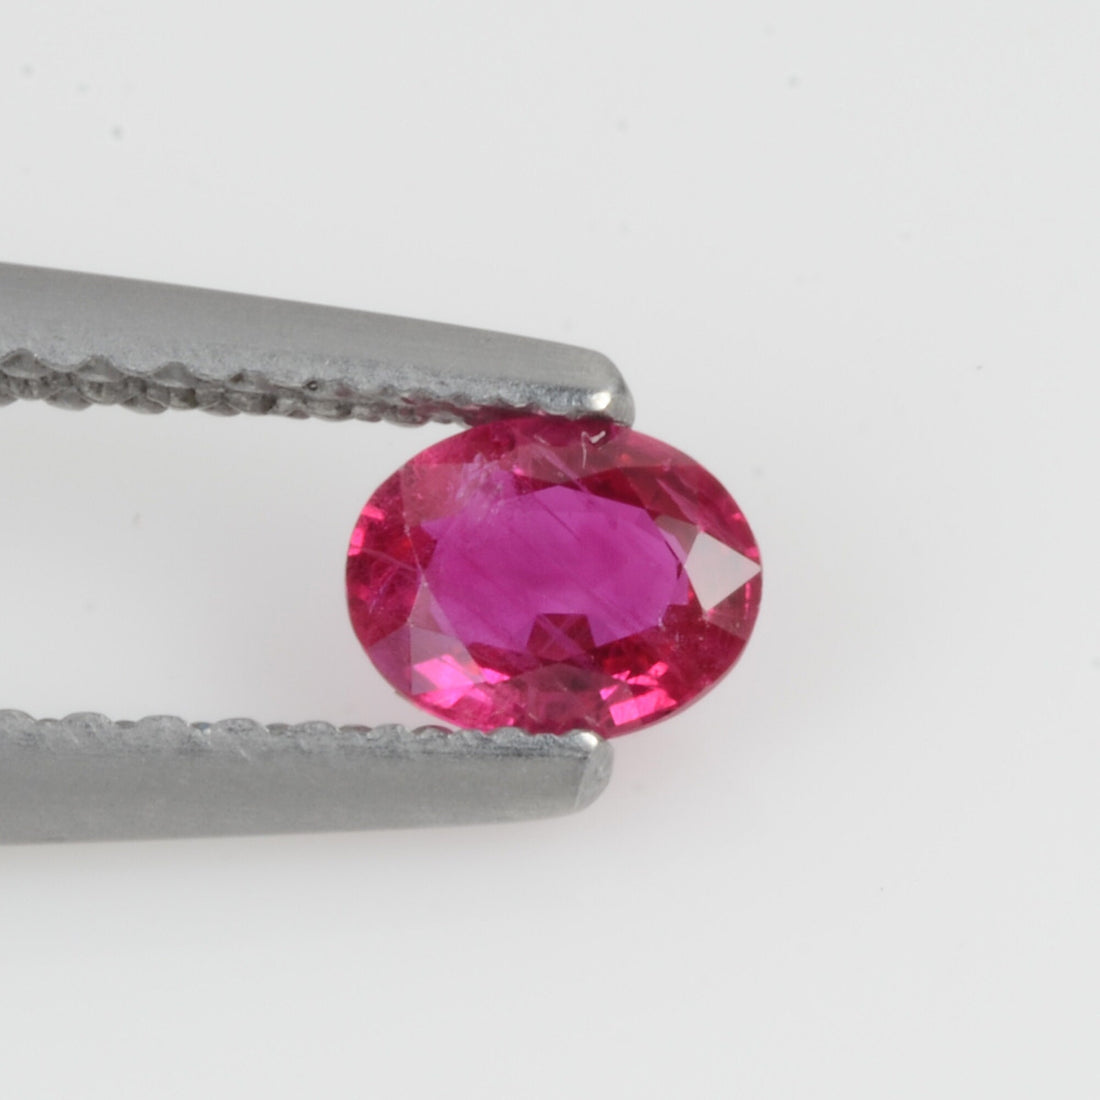 0.29 Cts Natural Ruby Loose Gemstone Oval Cut